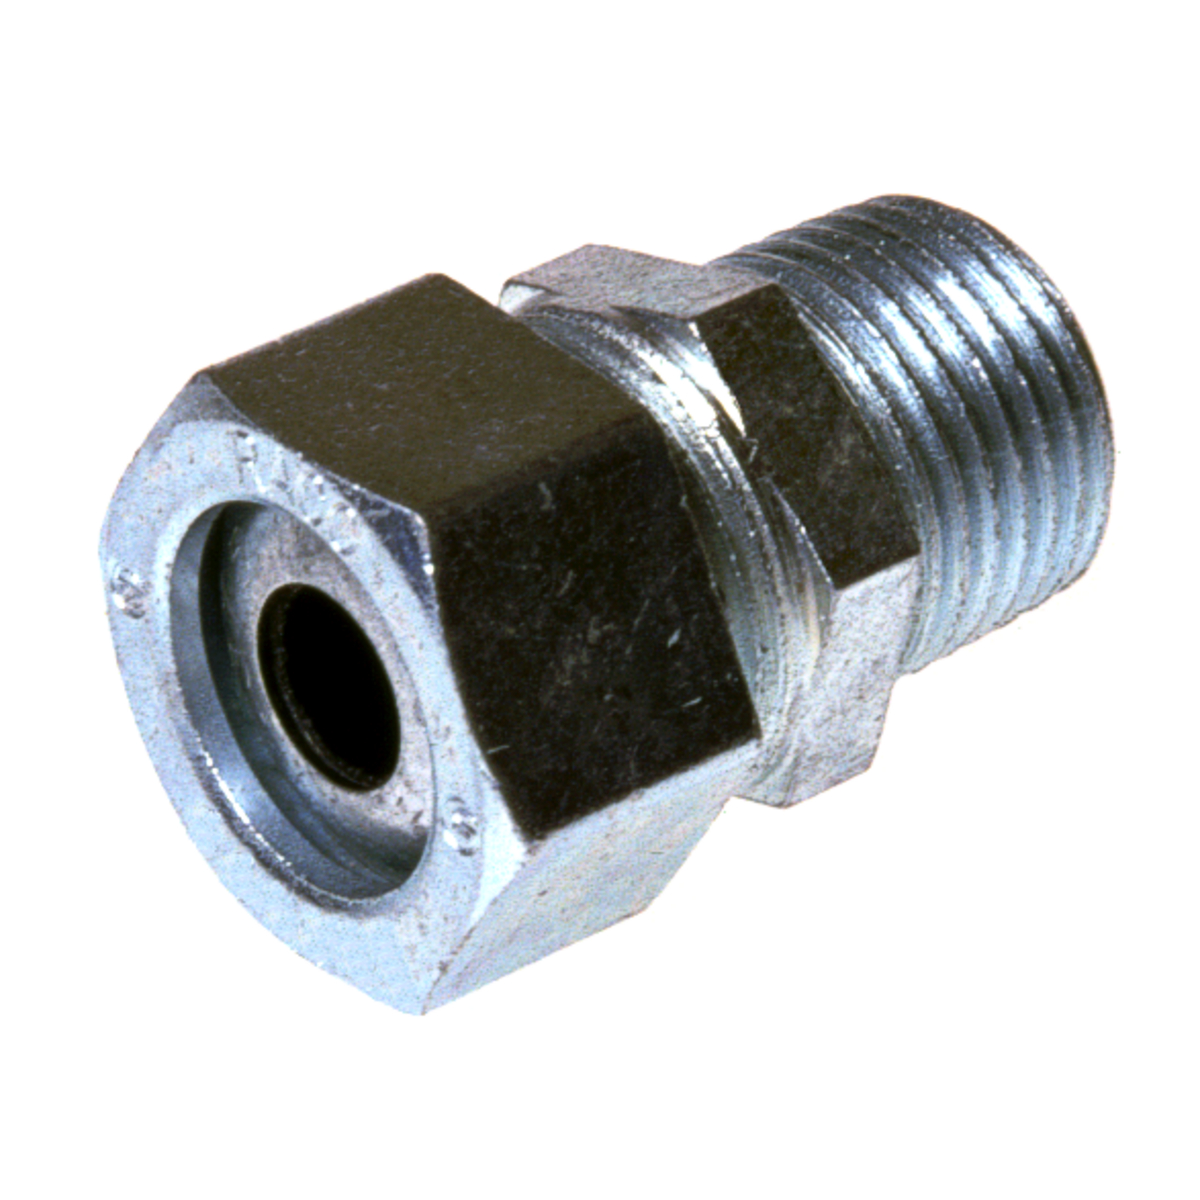 Straight Strain Relief Cord Connectors Steel/Malleable Iron, .600 - .650In. Cable Ranges